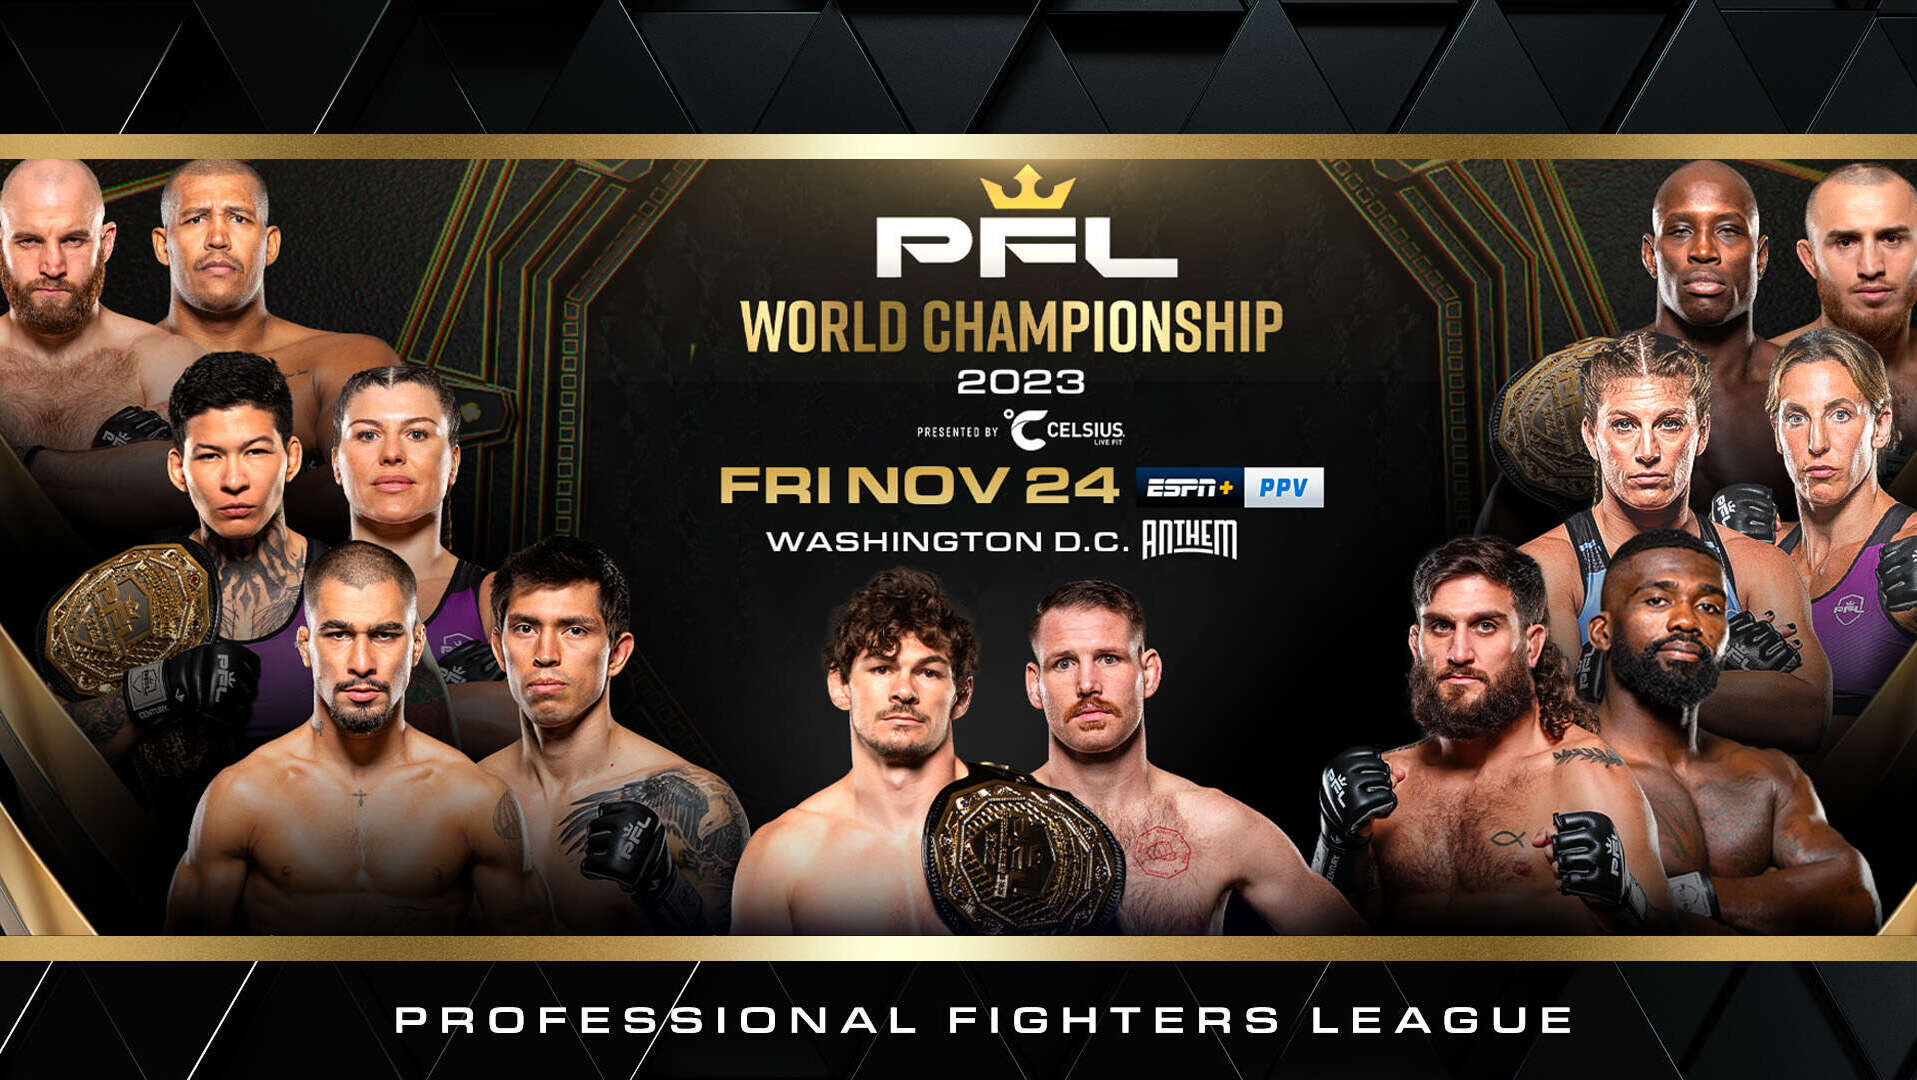 PFL 10: 2023 World Championship Official Poster